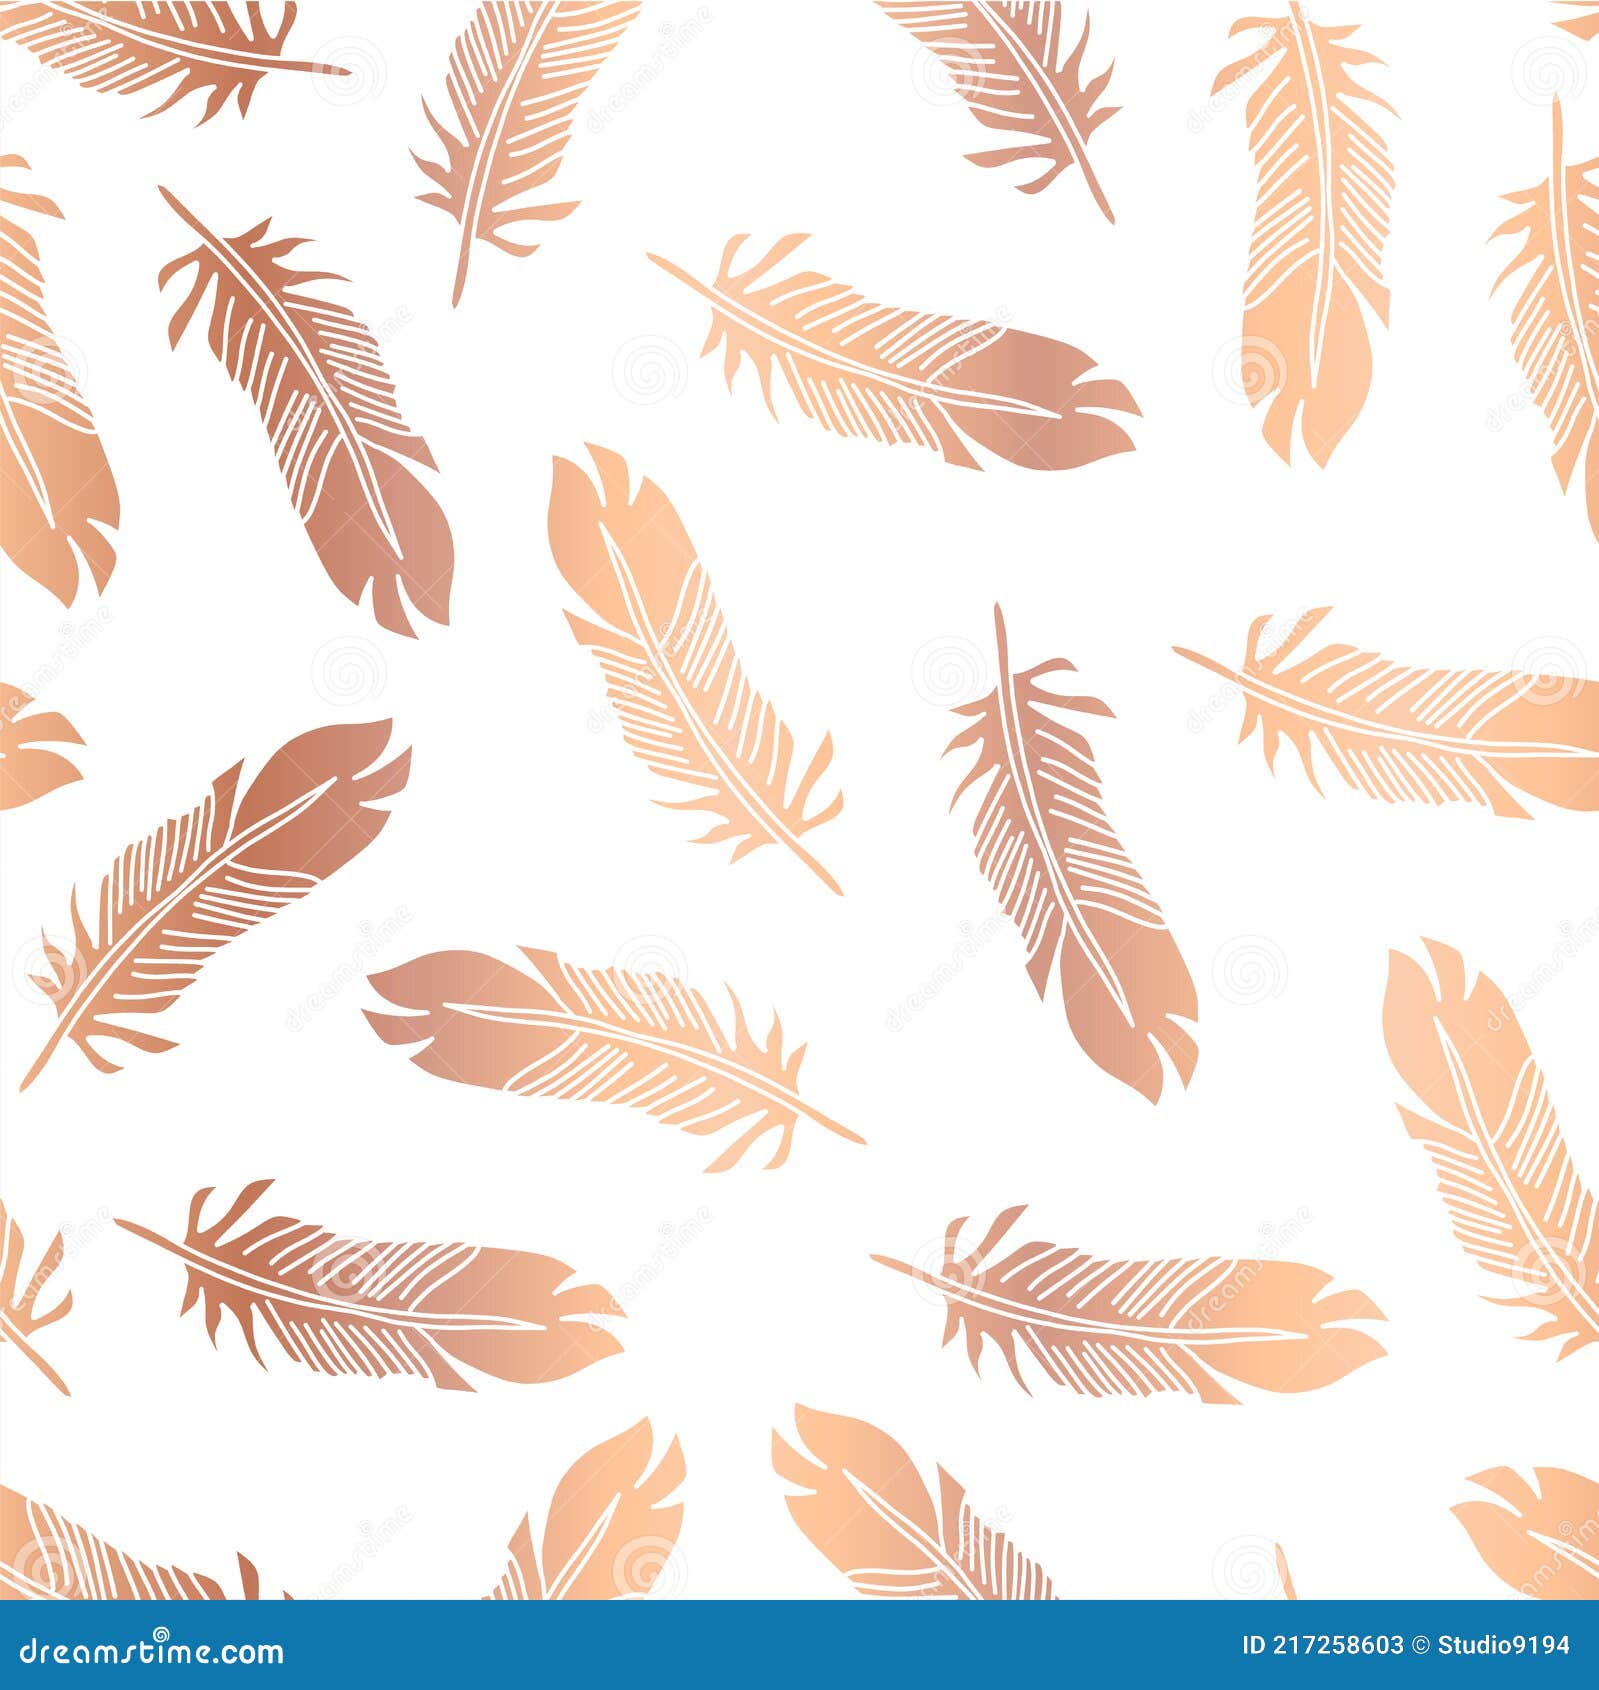 Copper Foil Feathers Seamless Vector Pattern. Repeating Background Metallic  Rose Gold Feather Illustration Stock Vector - Illustration of feather,  elegant: 217258603